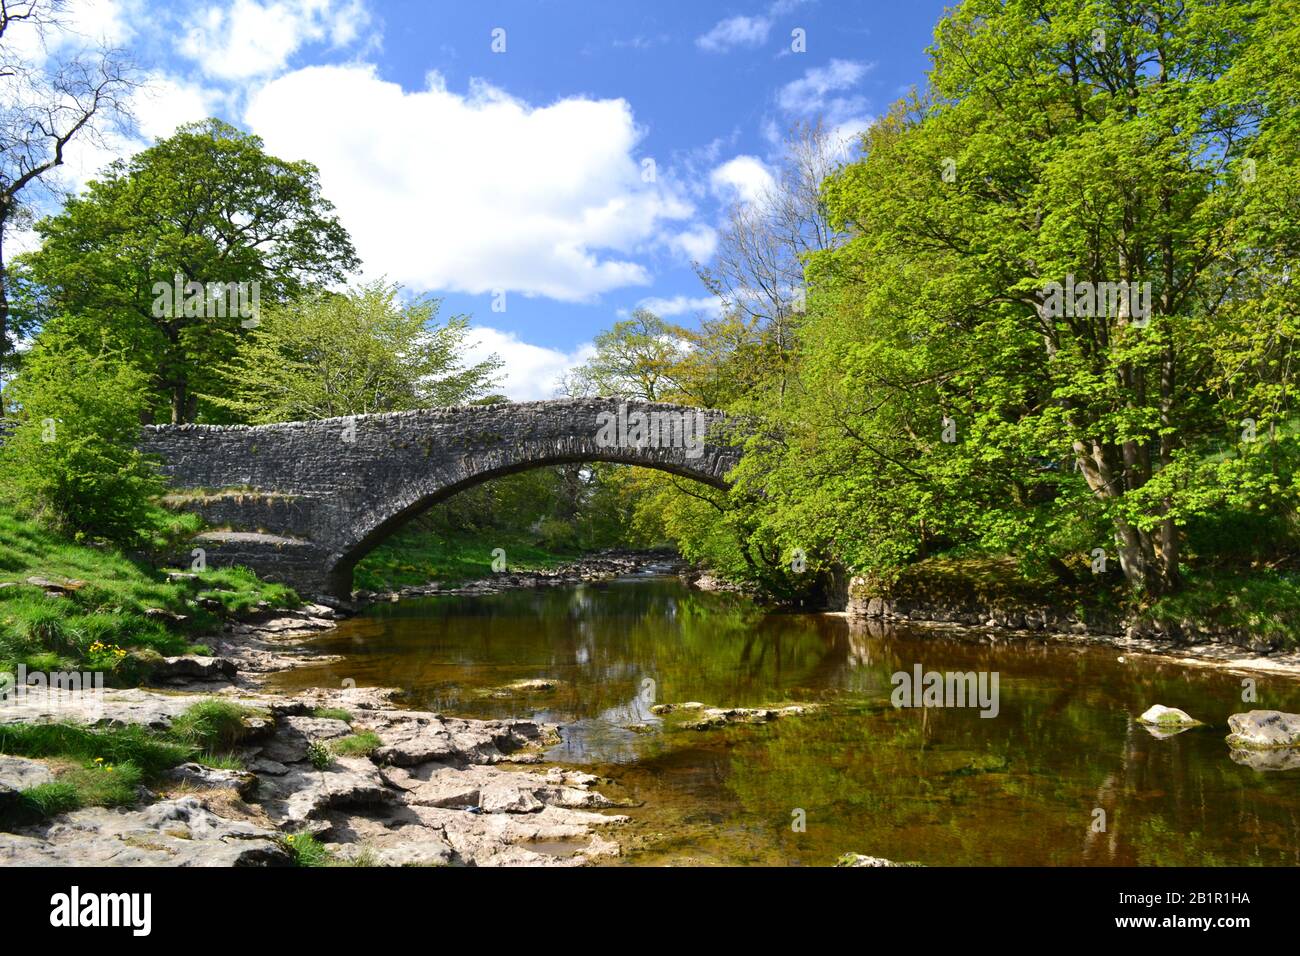 Bridge over the River Ribble in Stainforth Yorkshire in summertime Stock Photo